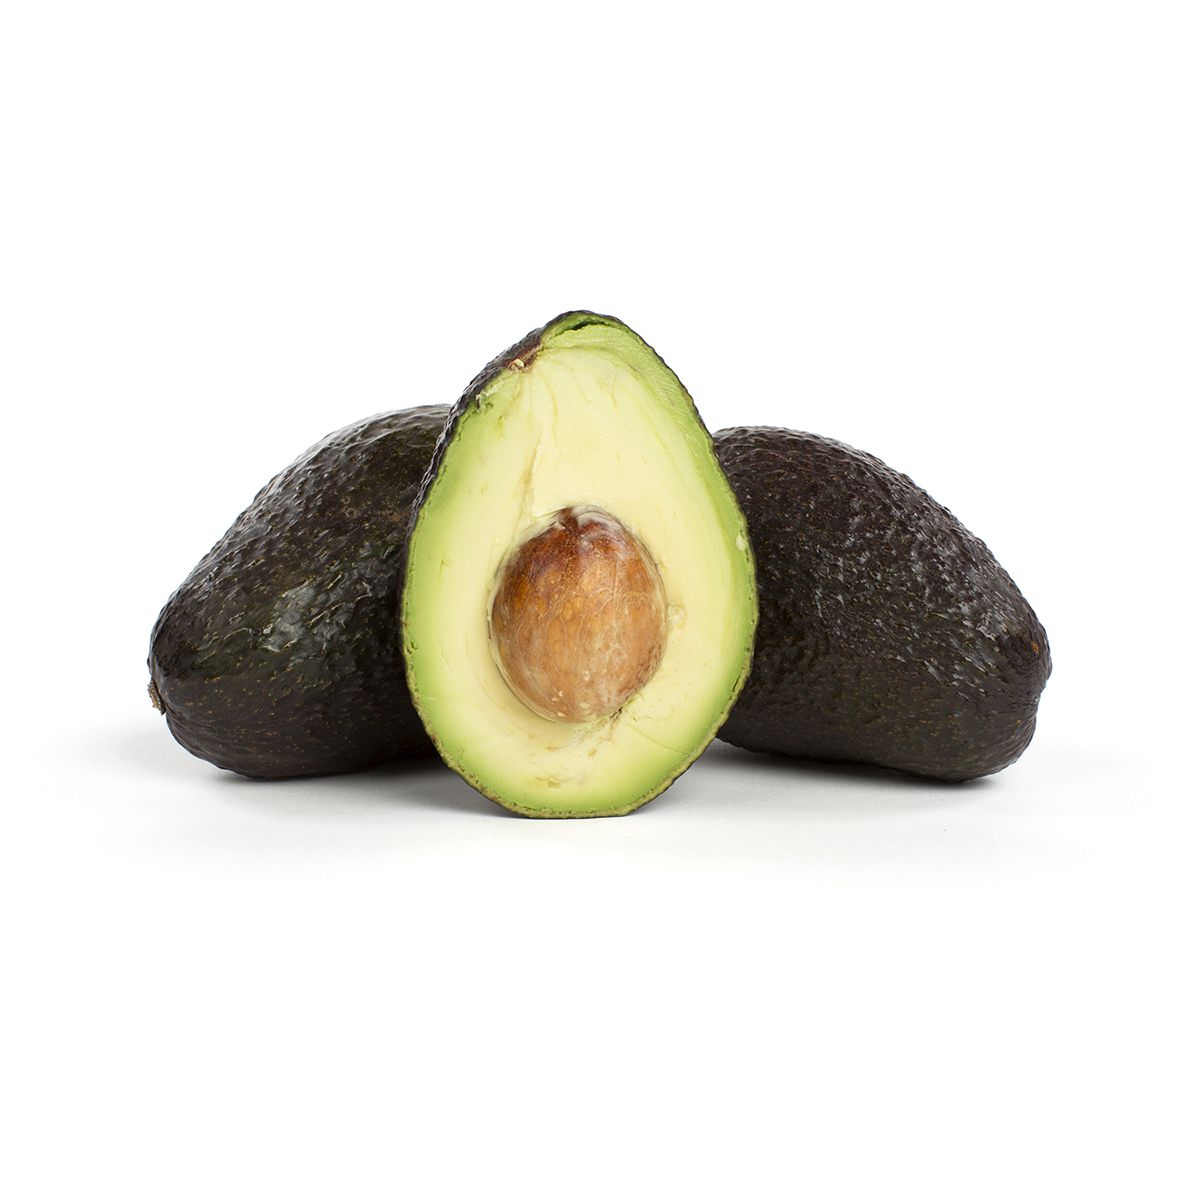 Avocados From Mexico Ripe Hass Avocados 48 Ct